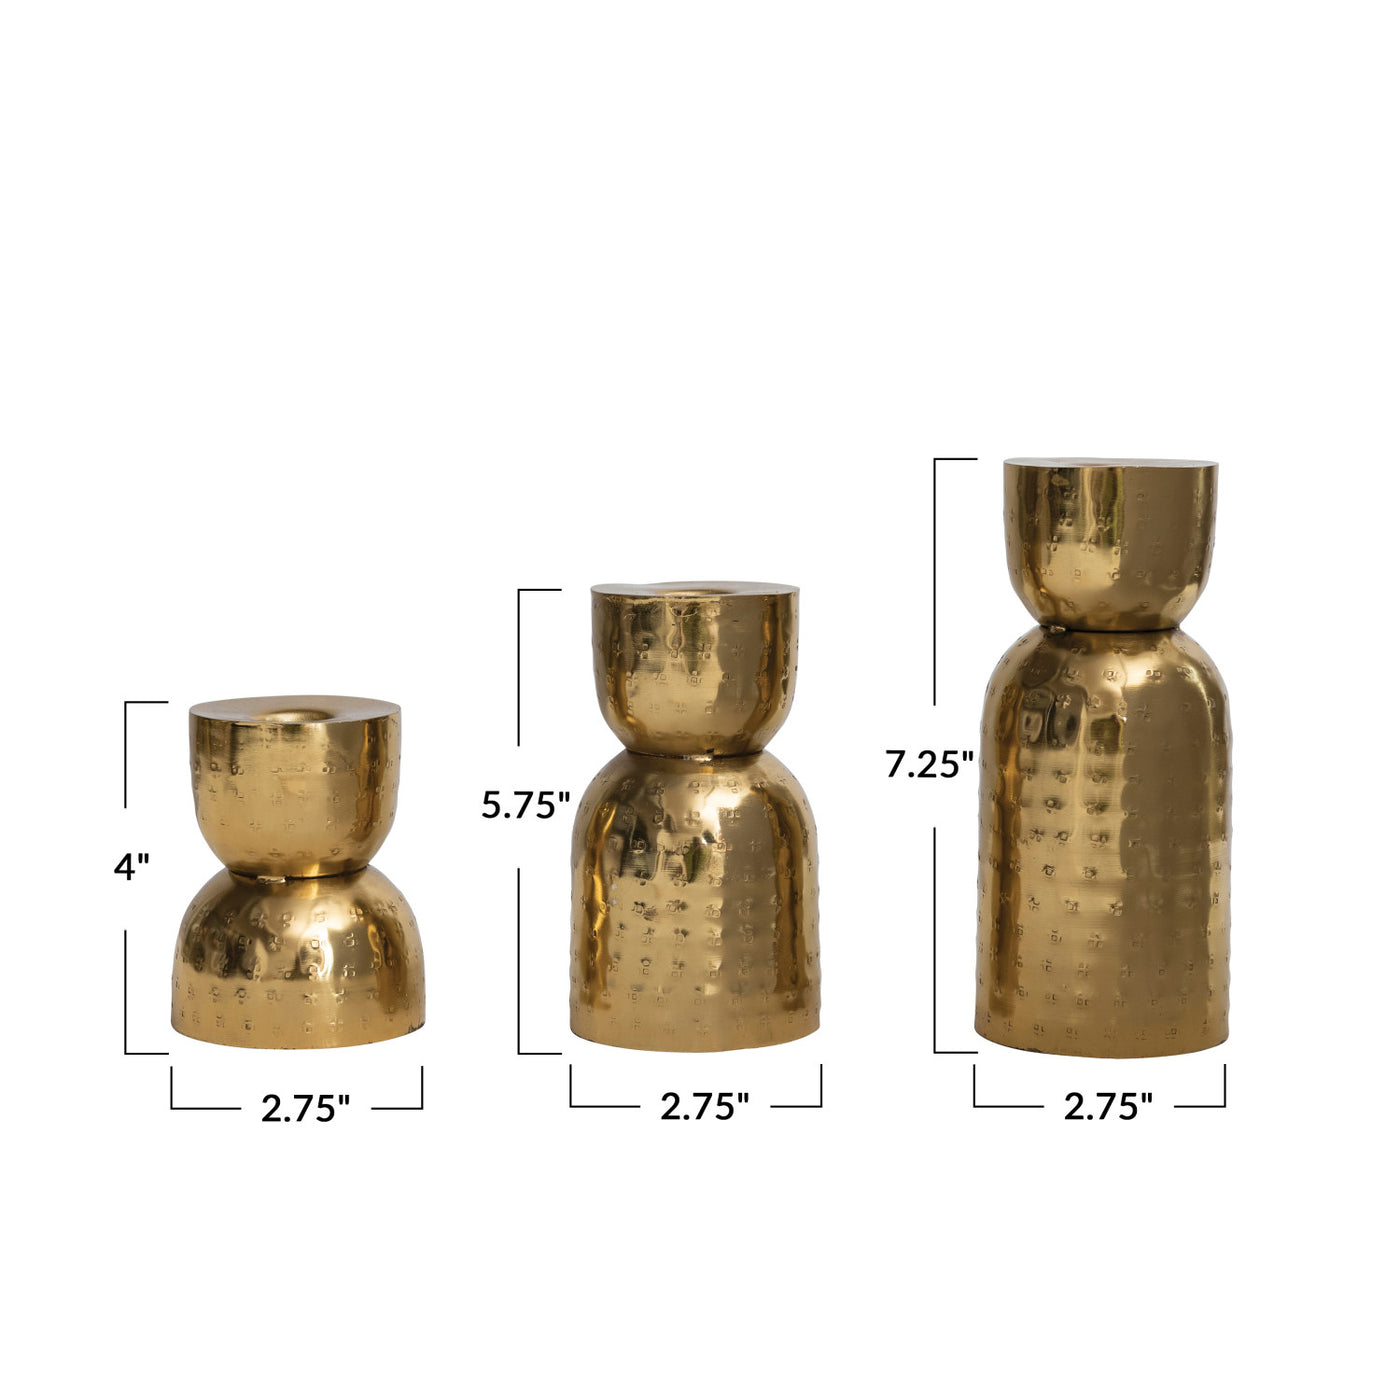 S/3 Hammered Metal Taper Holders - Antique Gold Finish